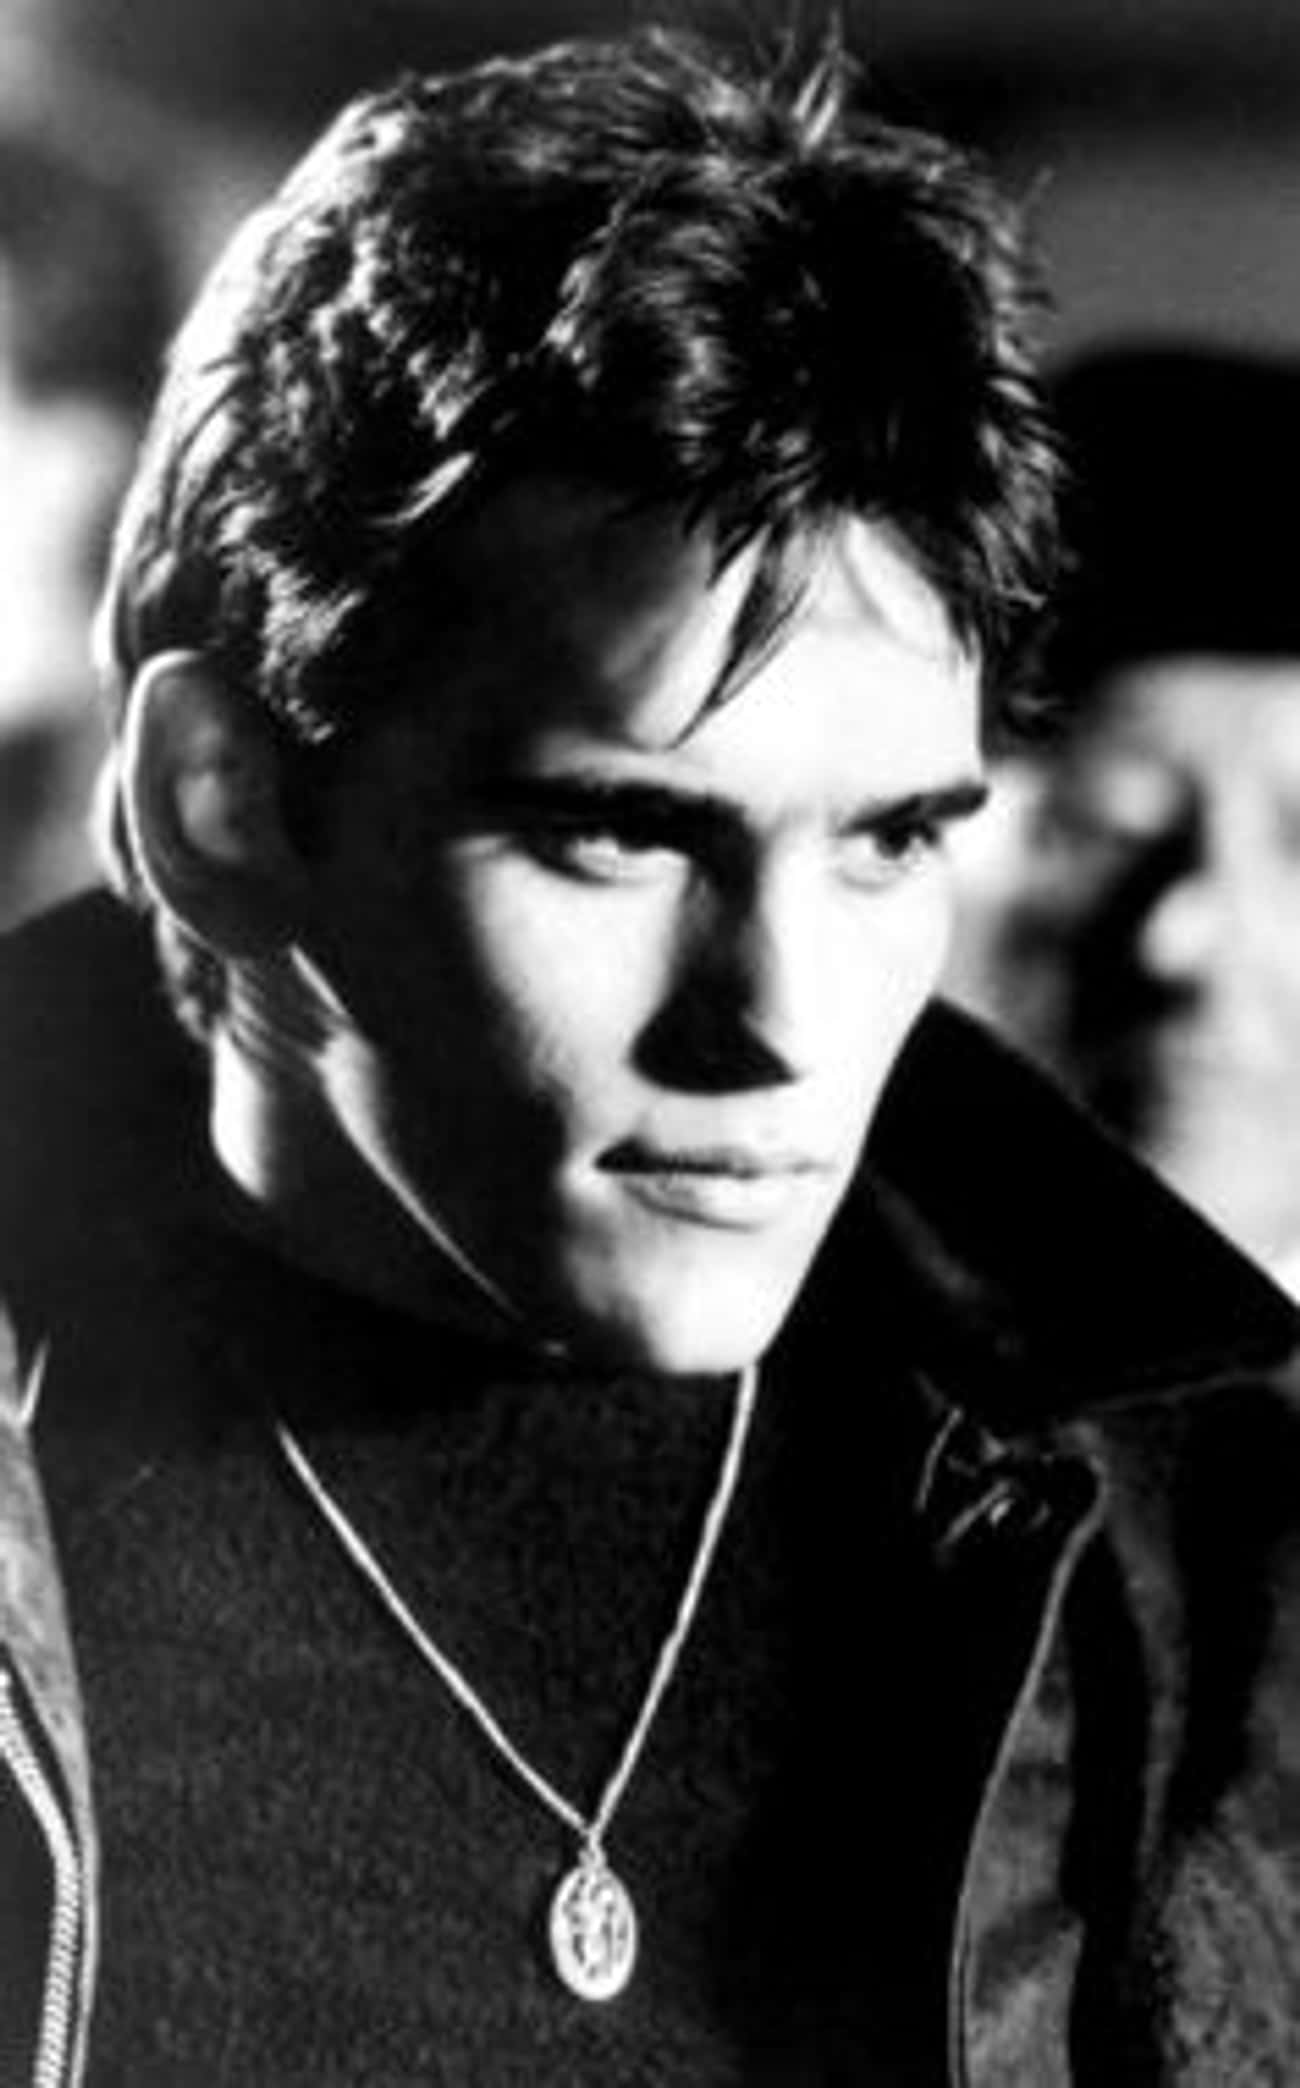 Young Matt Dillon in Gray Shirt and Black Leather Jacket